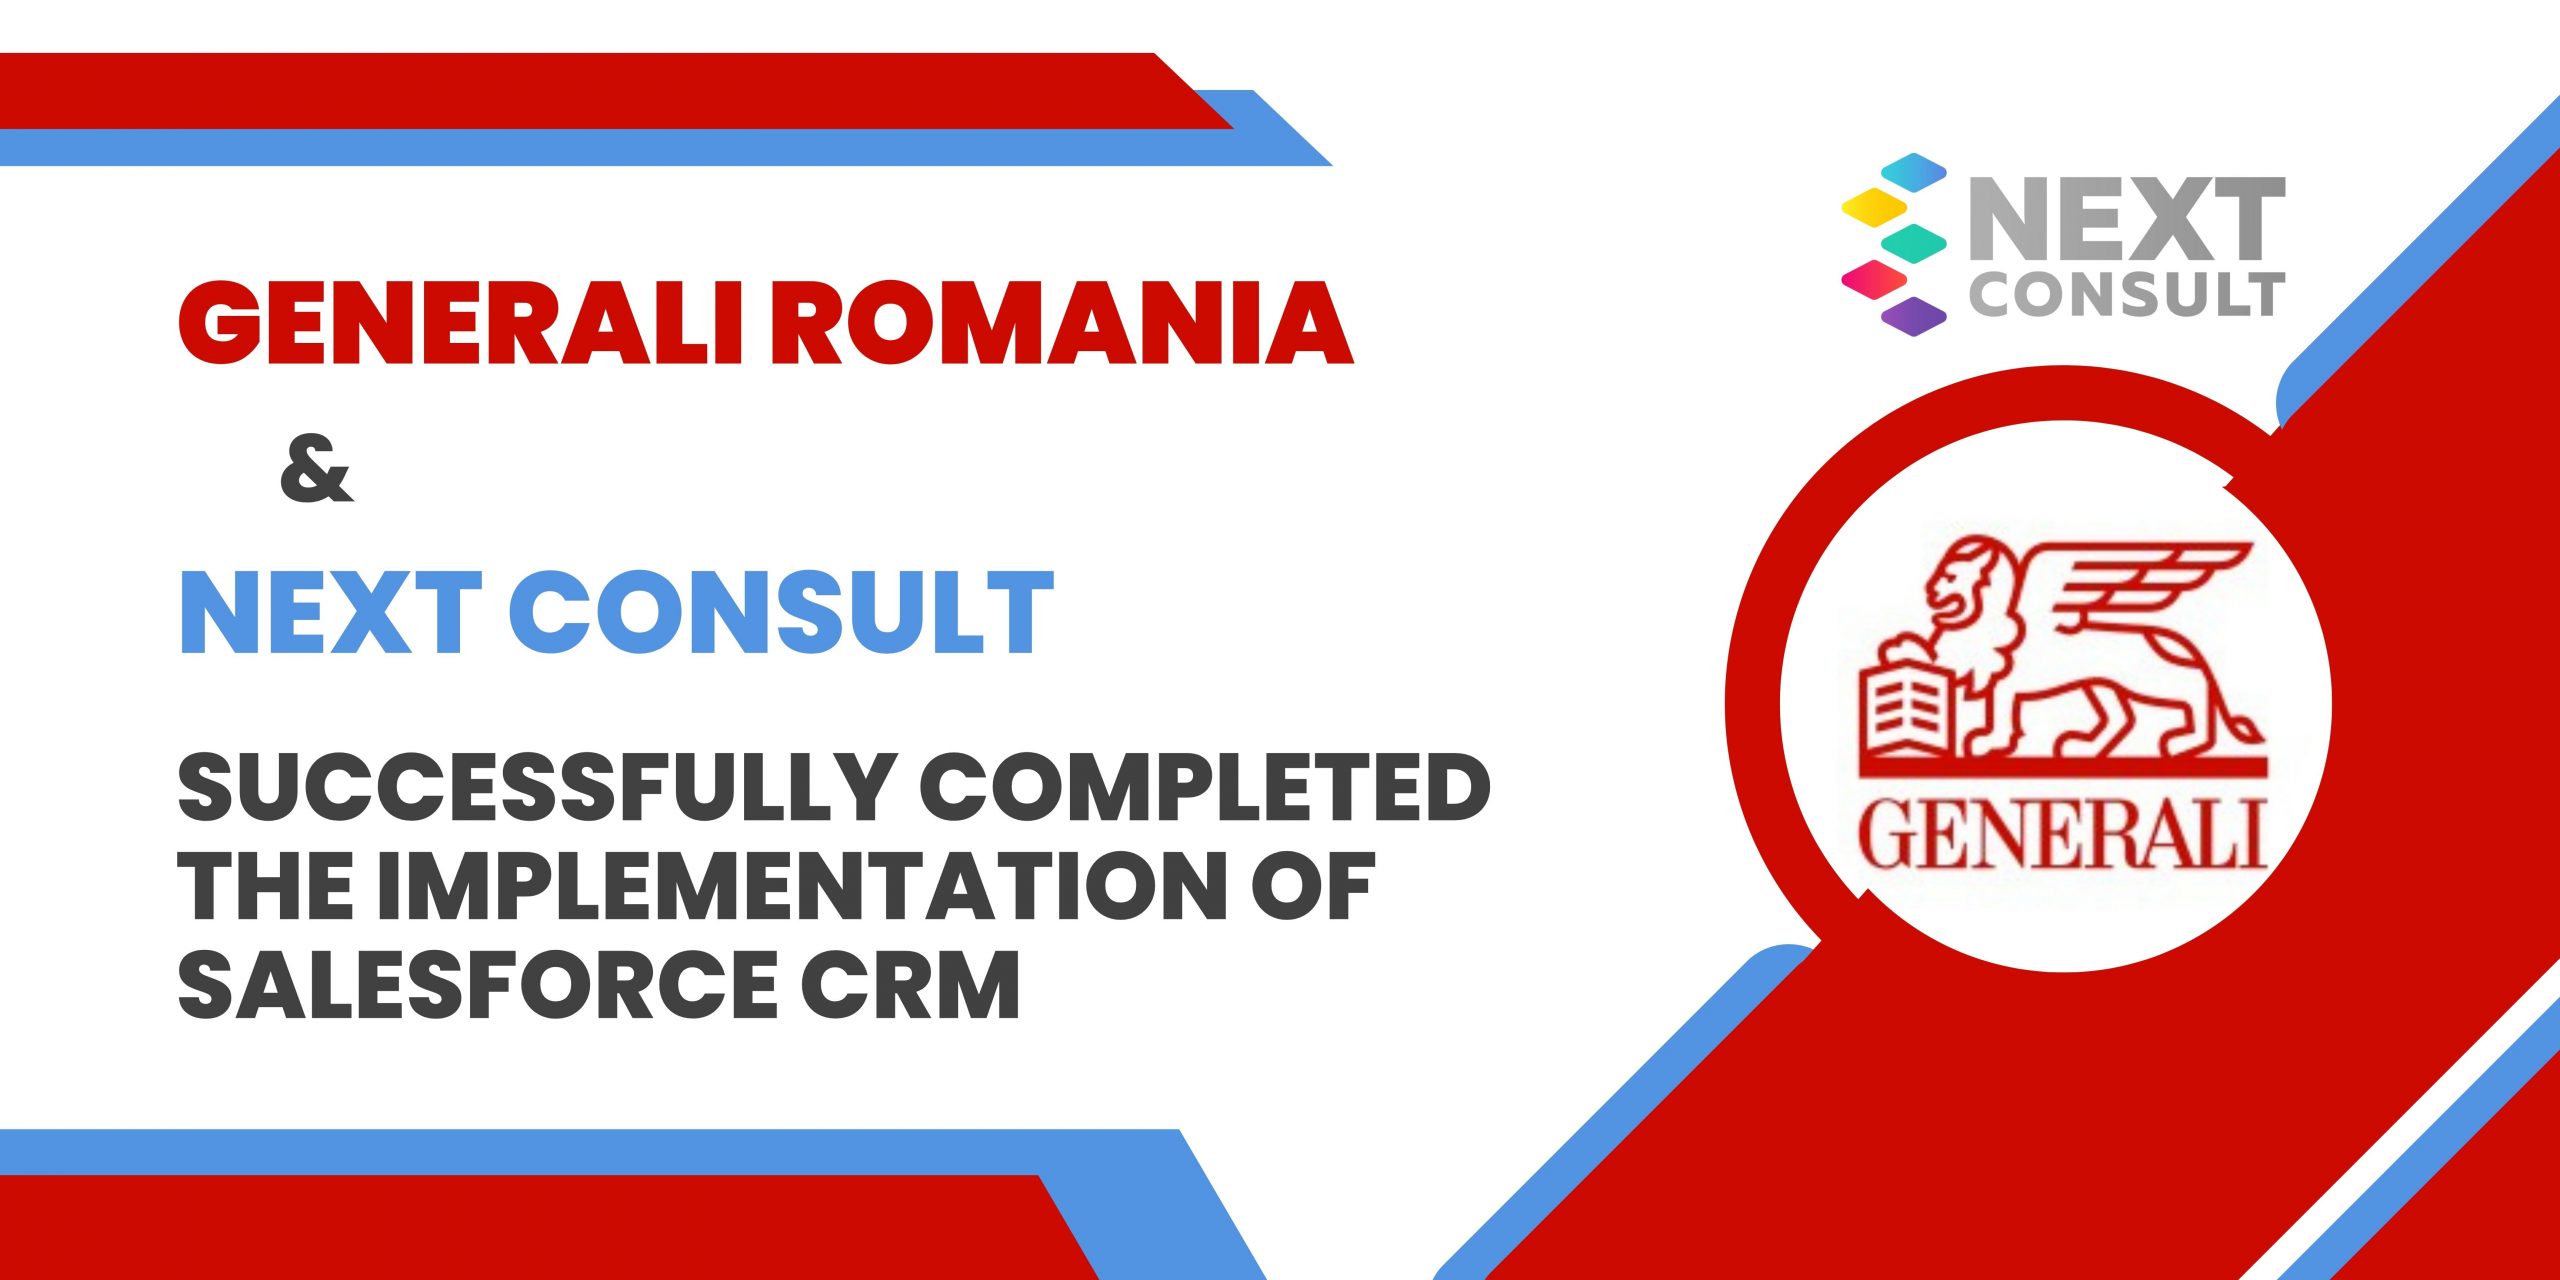 Generali Romania & Next Consult successfully completed the implementation of Salesforce CRM